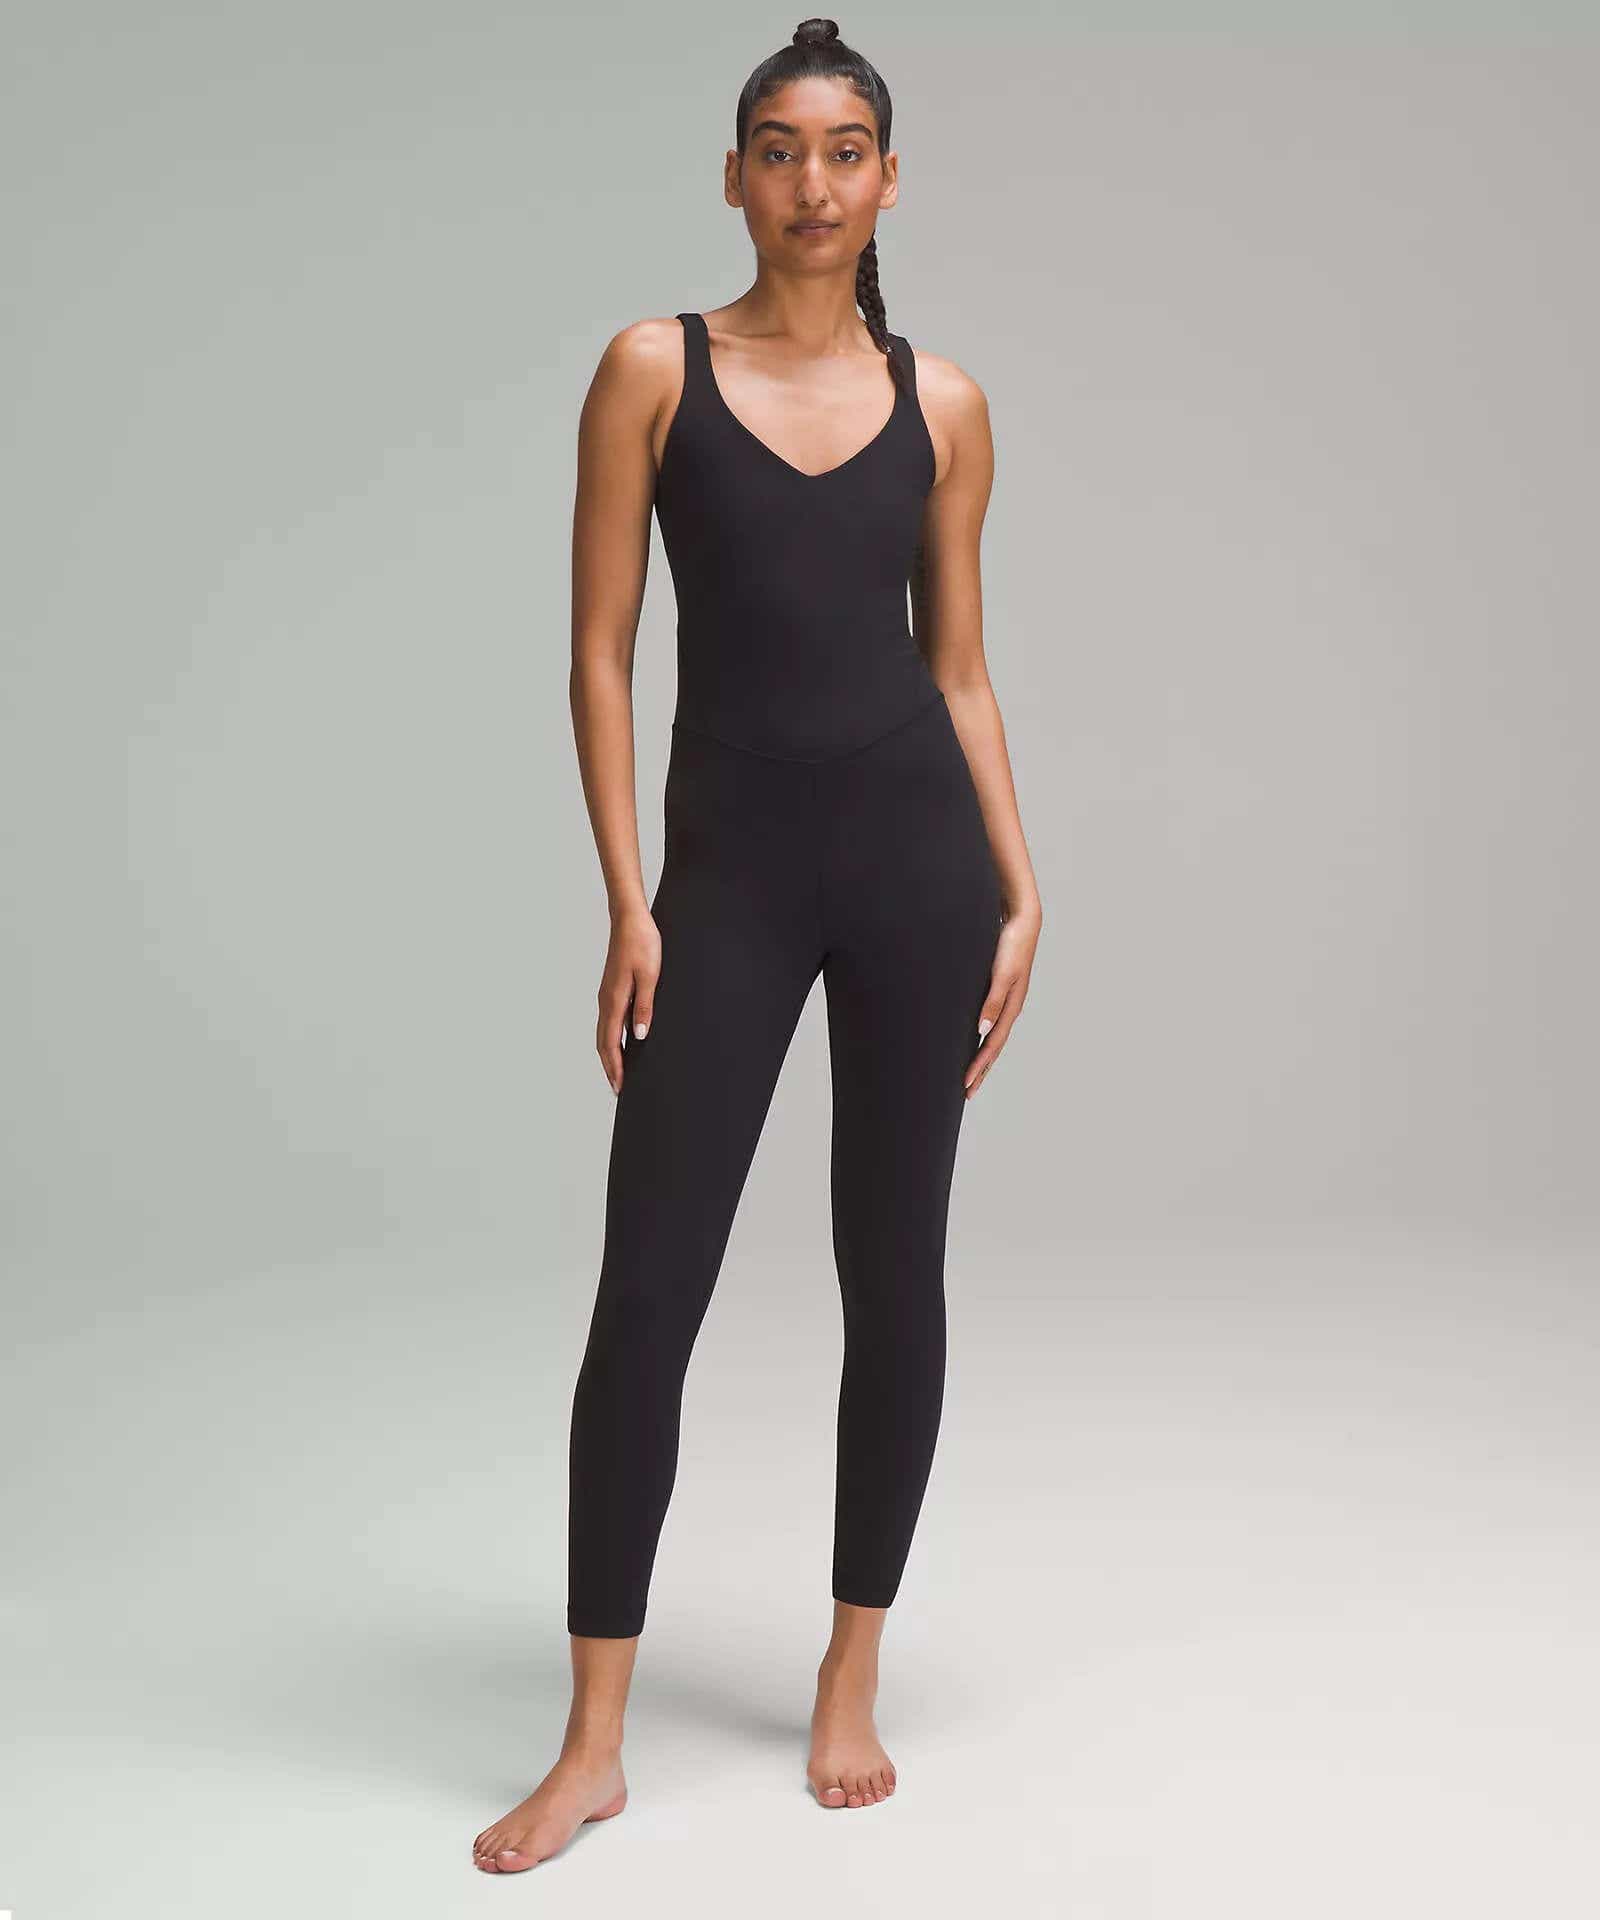 19 Best Mother's Day Gifts at Lululemon - Athleisure Gifts for Moms 2023